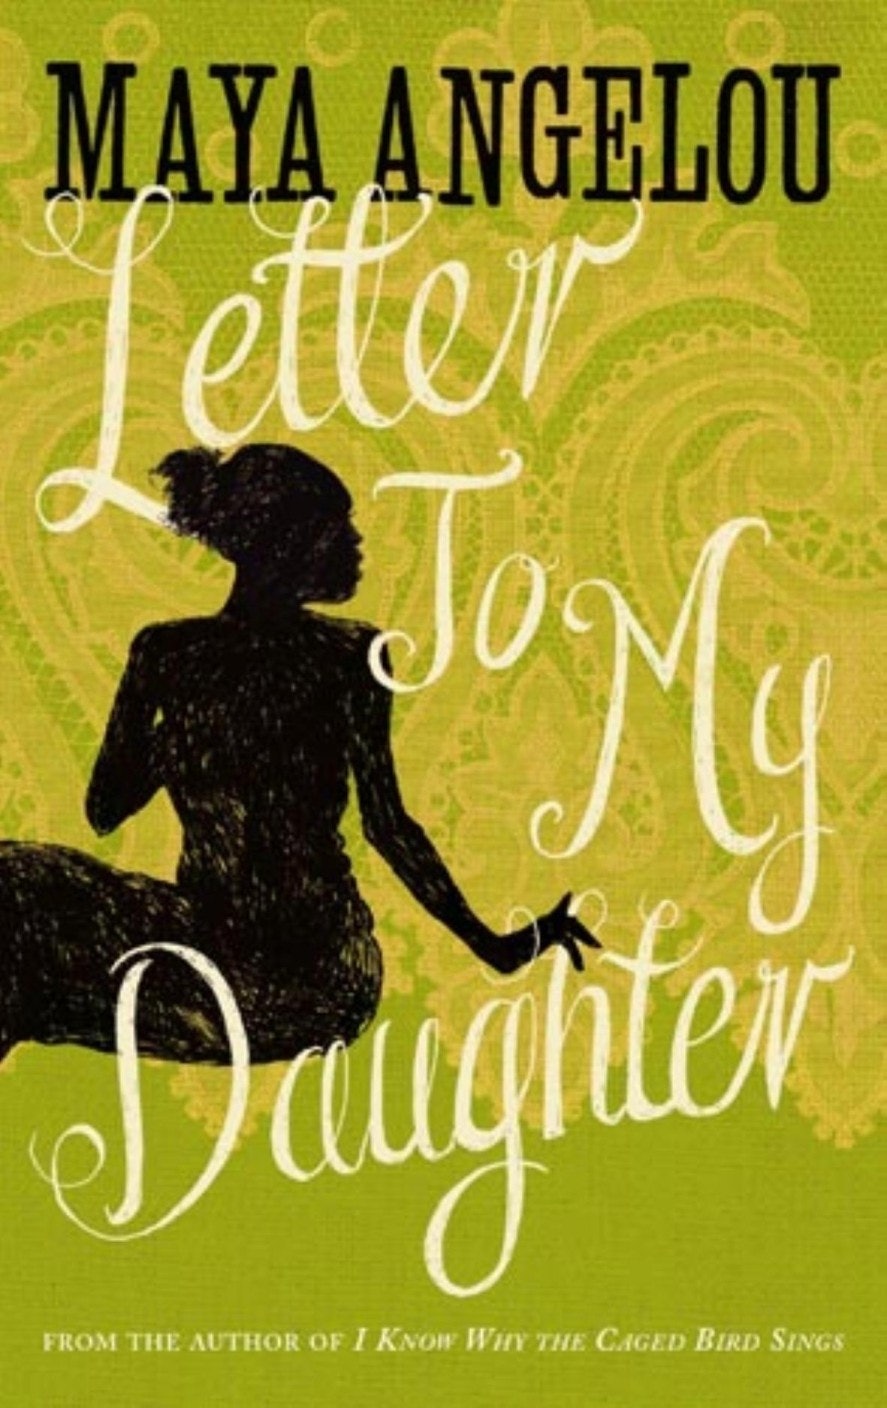 maya angelou letter to my daughter summary